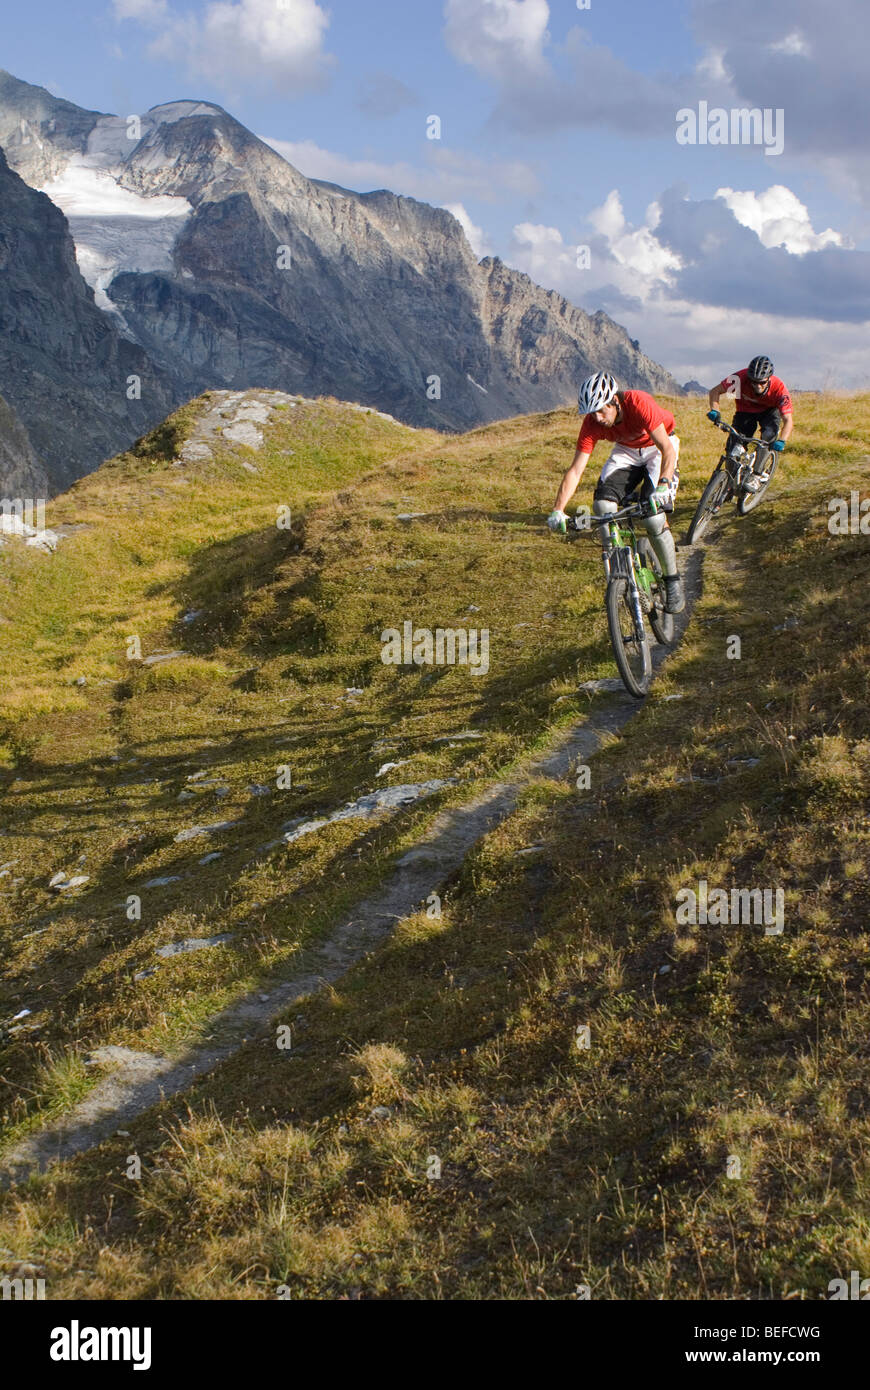 Two mountain bikers ride a trail near Les Arcs in the French Alps. Stock Photo